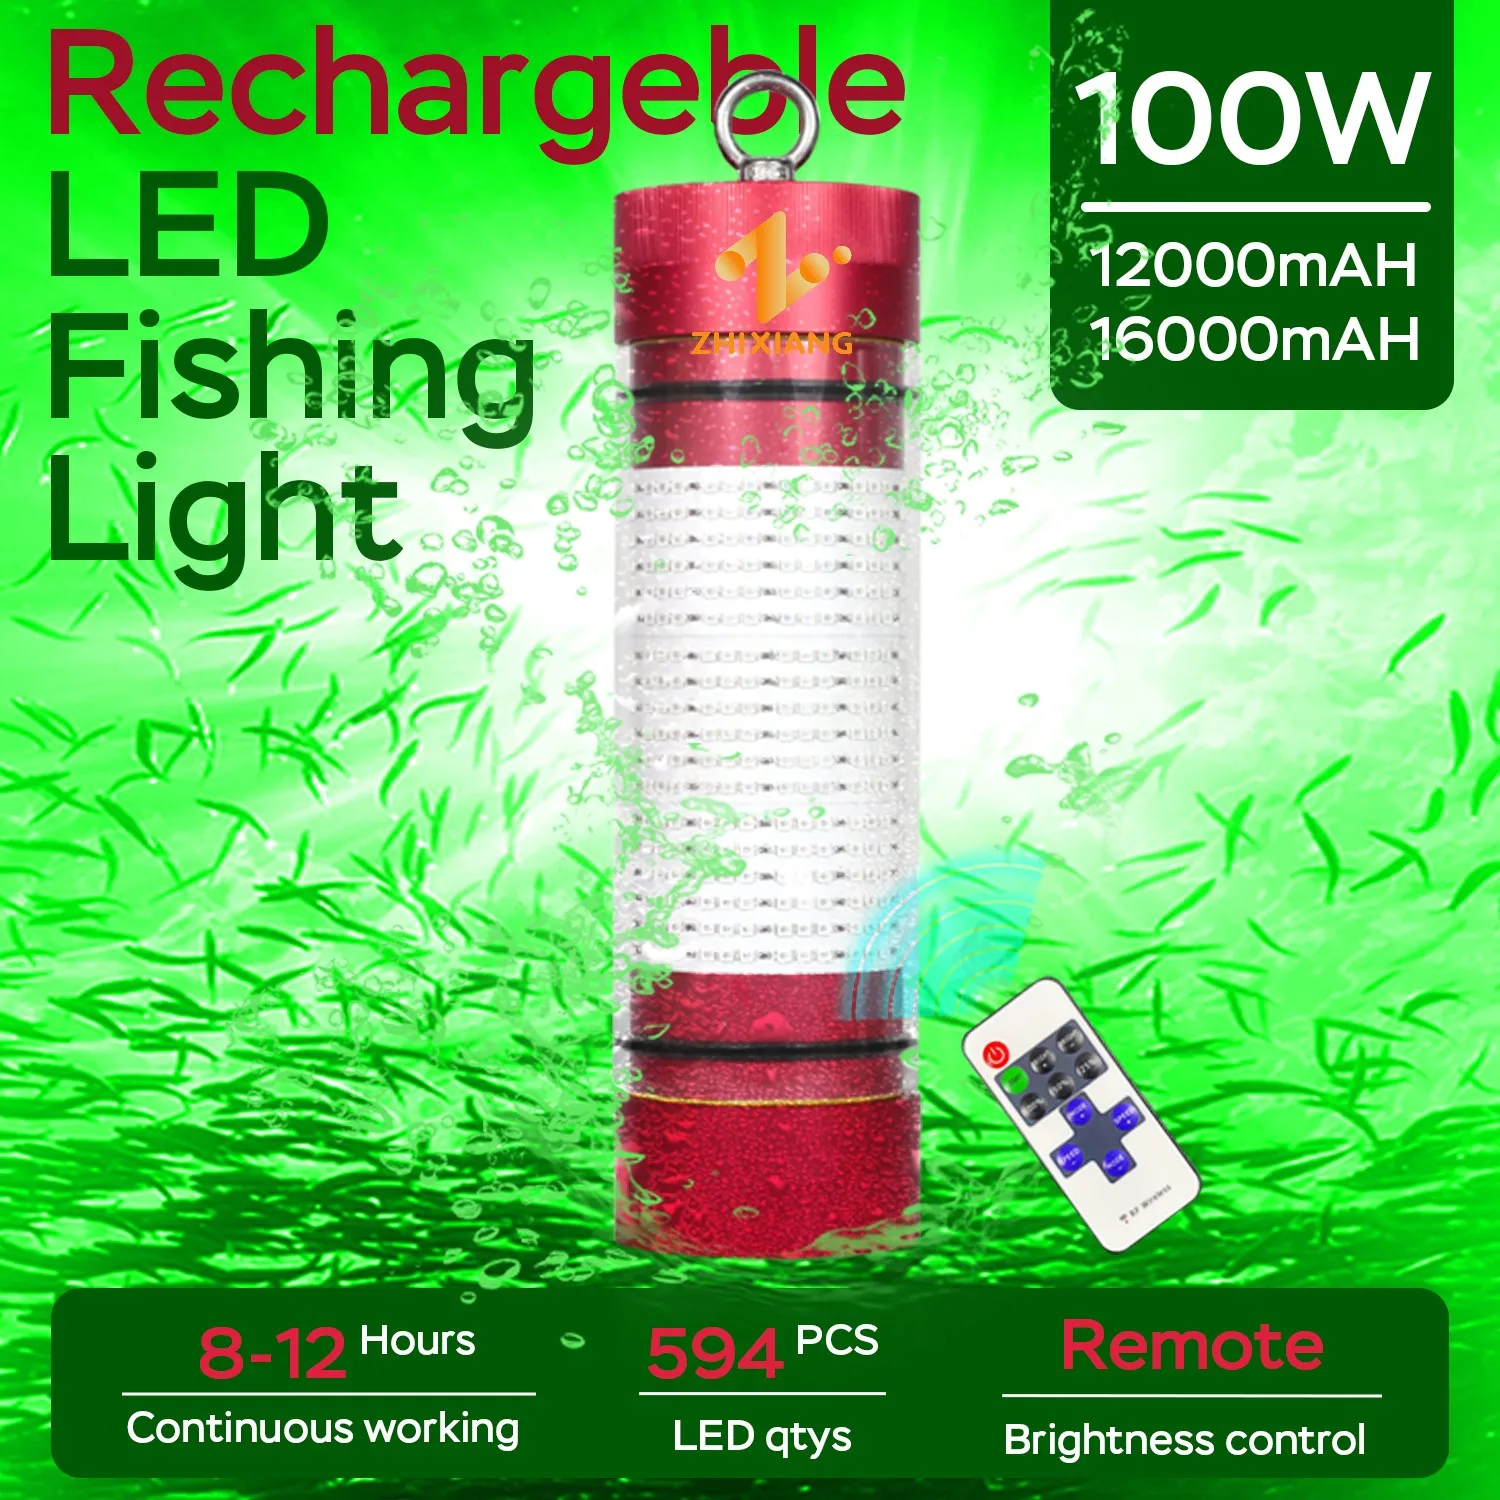 https://ae01.alicdn.com/kf/S38ea3301a433474c855ce31c1f27825aZ/Outdoors-IP68-100W-200W-Rechargeable-Fish-Attractor-Lure-Fishing-LED-Light-Underwater-Fishing-Light.jpg